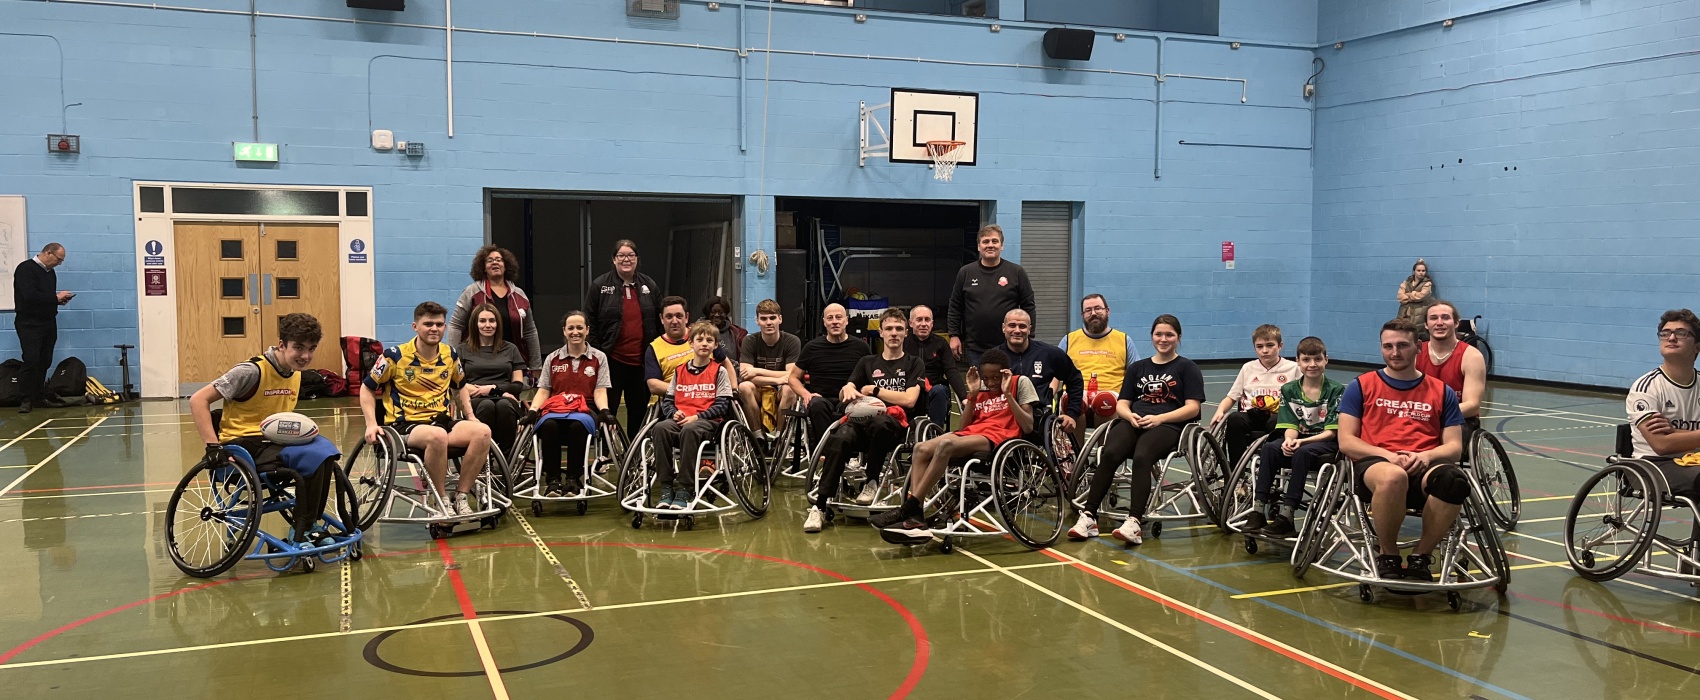 Eagles Foundation to assist at Yorkshire Wheelchair Sports Festival